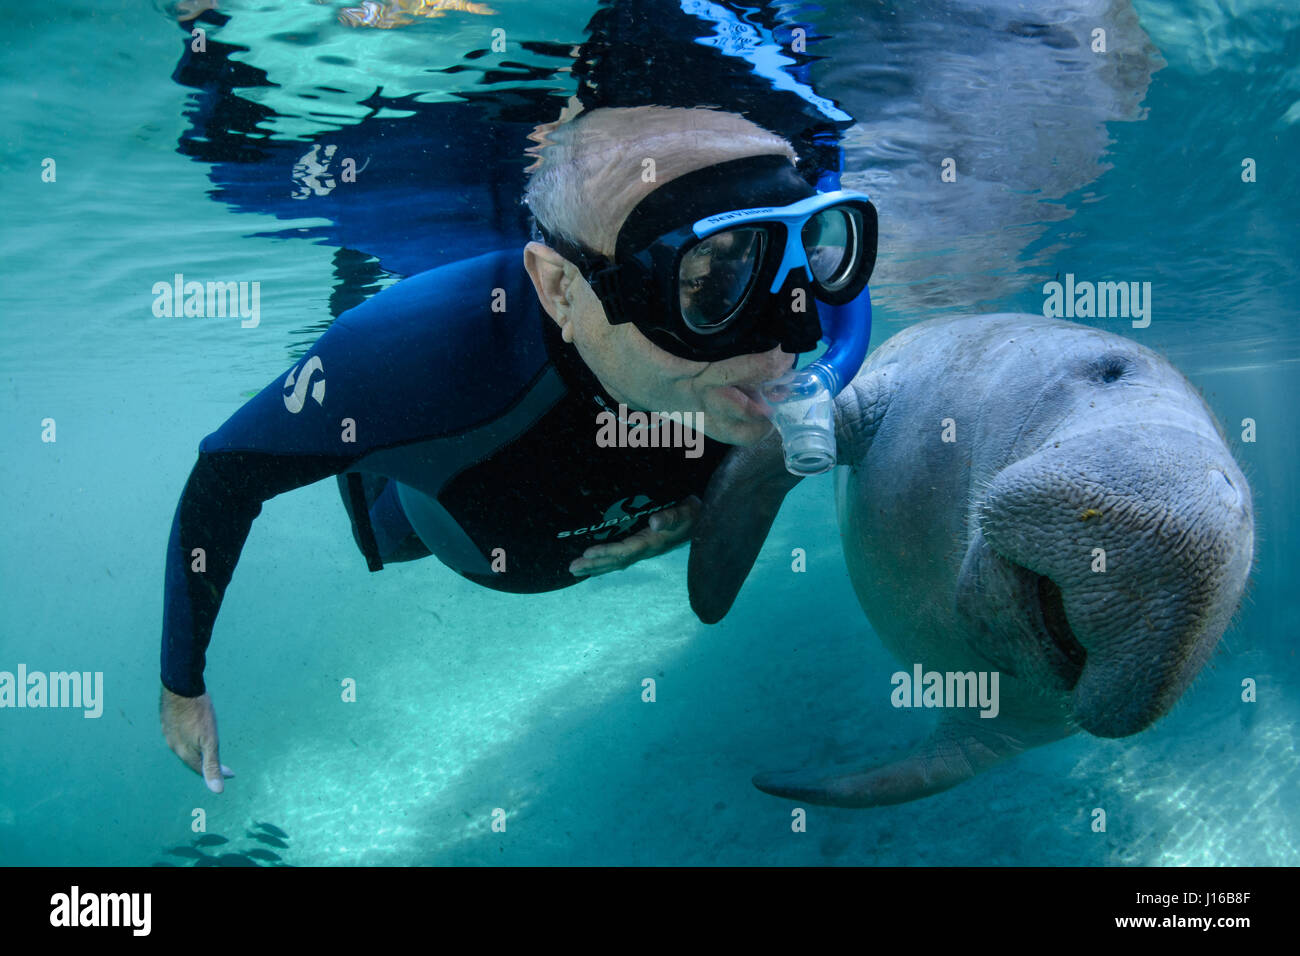 CRYSTAL RIVER, FLORIDA: husband Theo Grant, with a very gentle and clam demeanor, attracts a  female manatee who refused to leave his side. WILD half-ton manatees are so in love with their human pals that they cannot resist touching, kissing and posing for selfies with them. A particular “manatee magnet” is Theo Grant who attracts the curious marine mammals – nicknamed sea cows – by pretending to be manatees. This means floating in the water and moving slowly just like one of the gentle giants. Theo is so successful at this that several of the lady manatees are in love with him, according to h Stock Photo